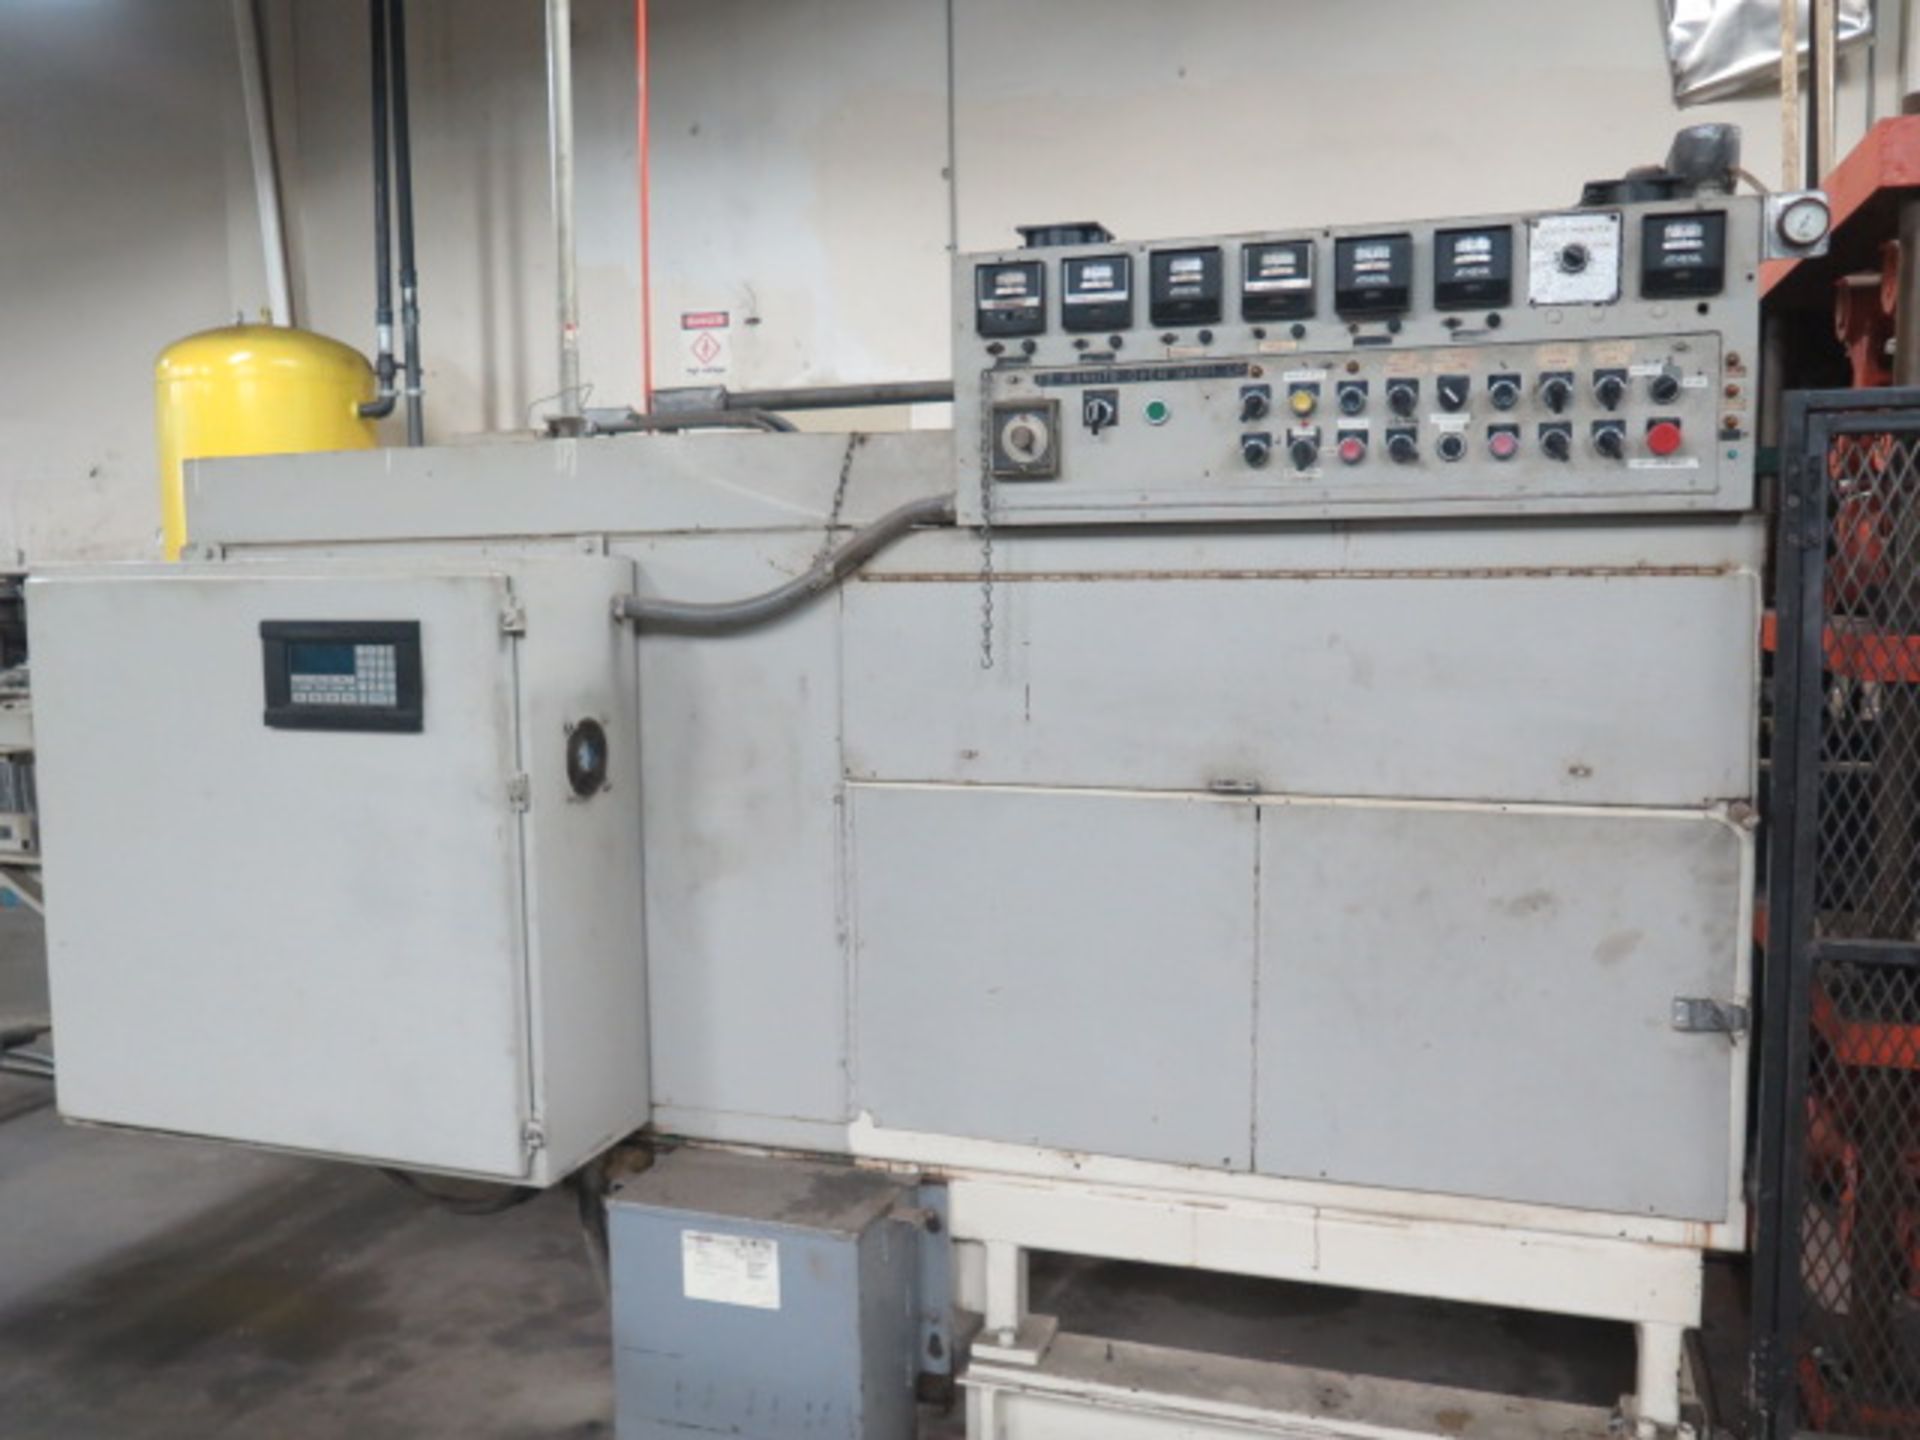 Packaging Industries mdl. 2300 Thermoforming Machine s/n 270-094-80 w/ Digital Controls, SOLD AS IS - Image 4 of 24